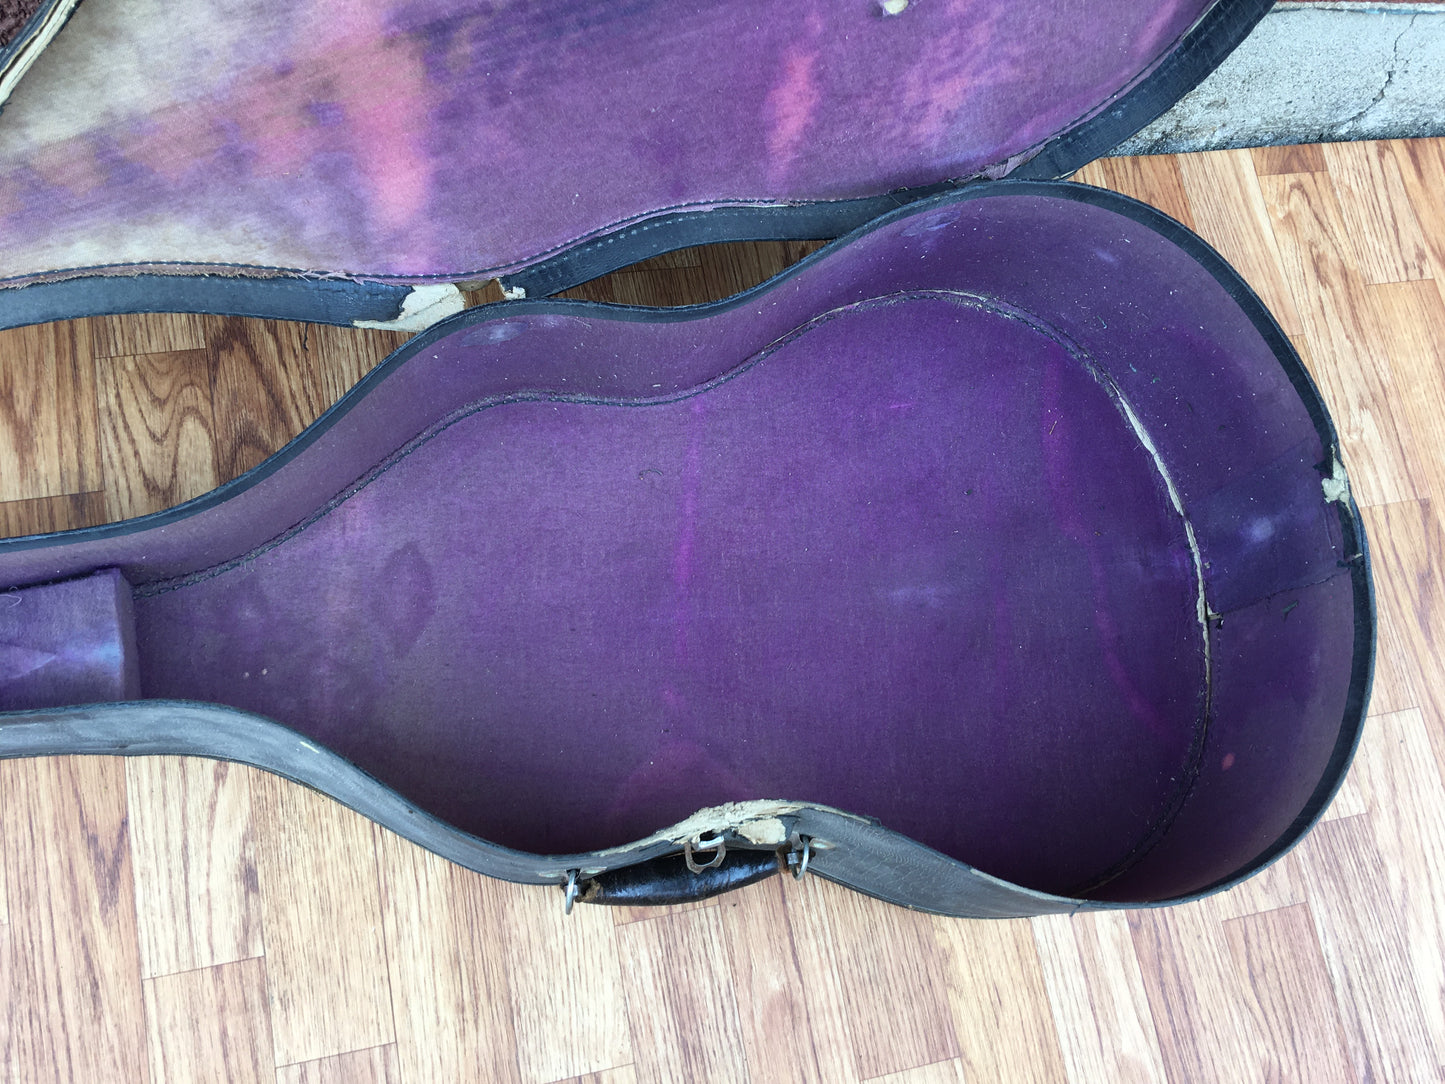 1930s Geib Challenge Purple Liner Gator Print Flat Top Acoustic Guitar Case for Gibson, Kay, Others